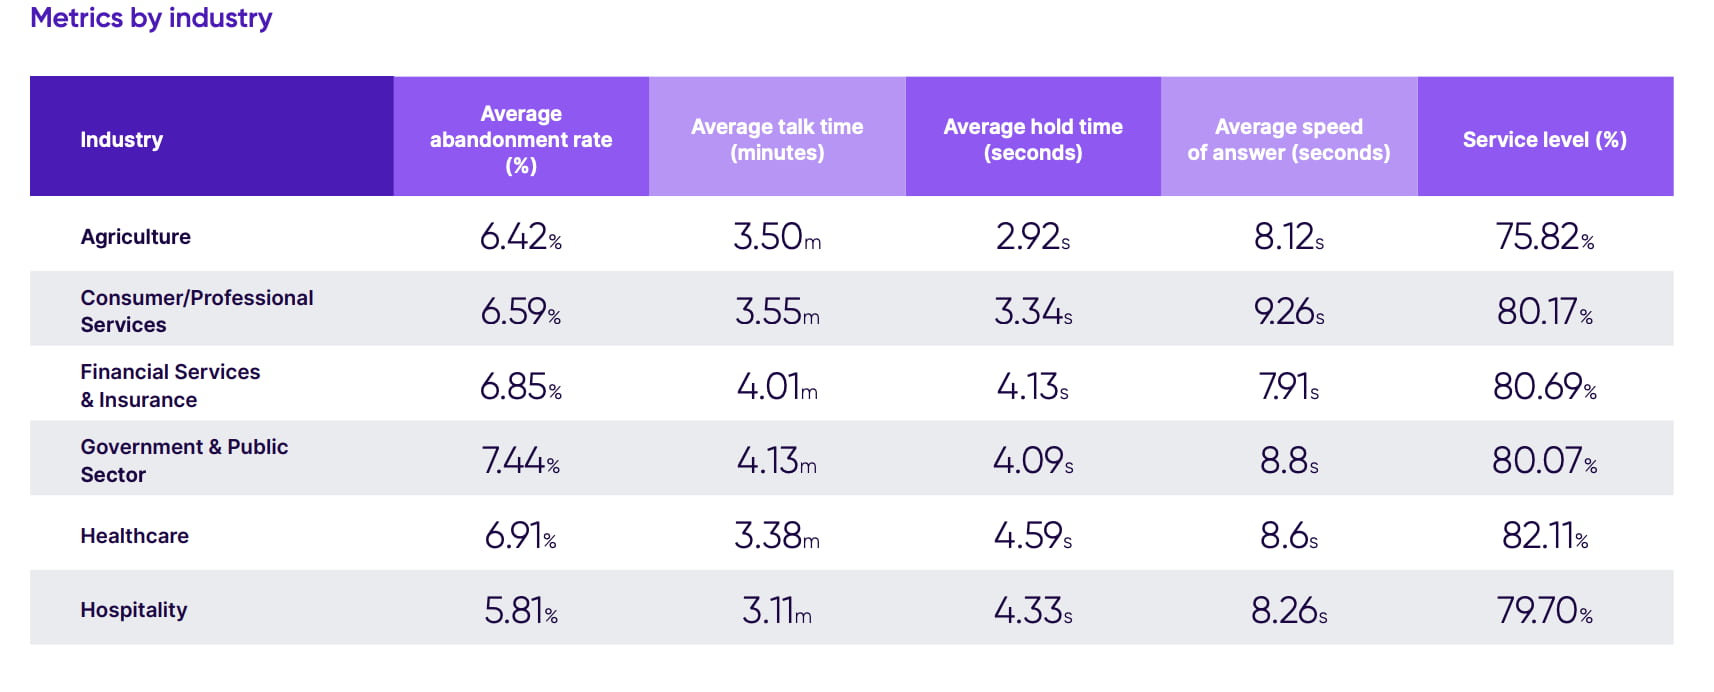 call abandonment rate benchmarks by industry